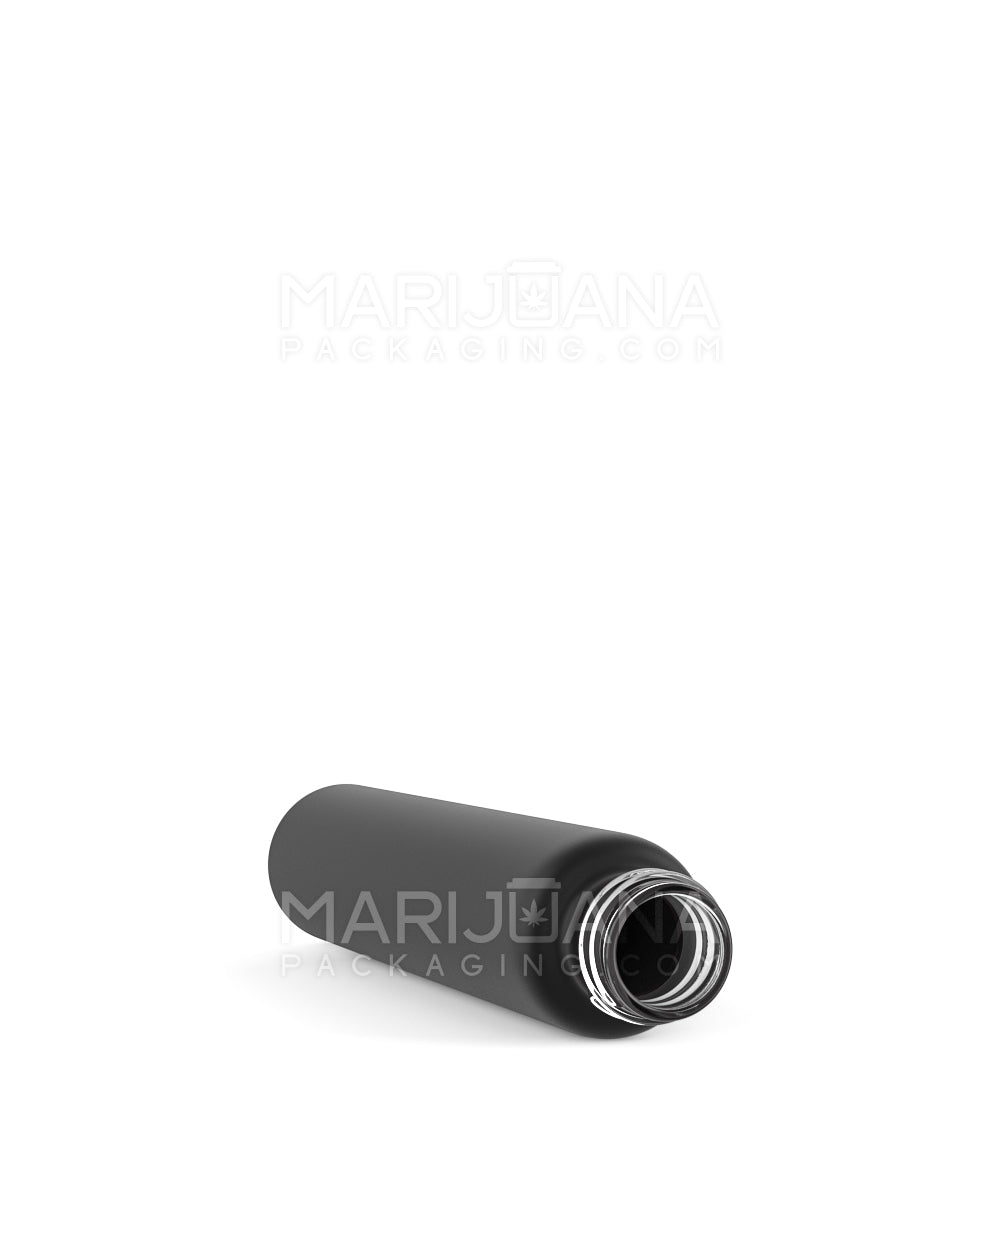 115mm Glass Pre-Roll Tubes with Black Child Resistant Cap (Ridged) 